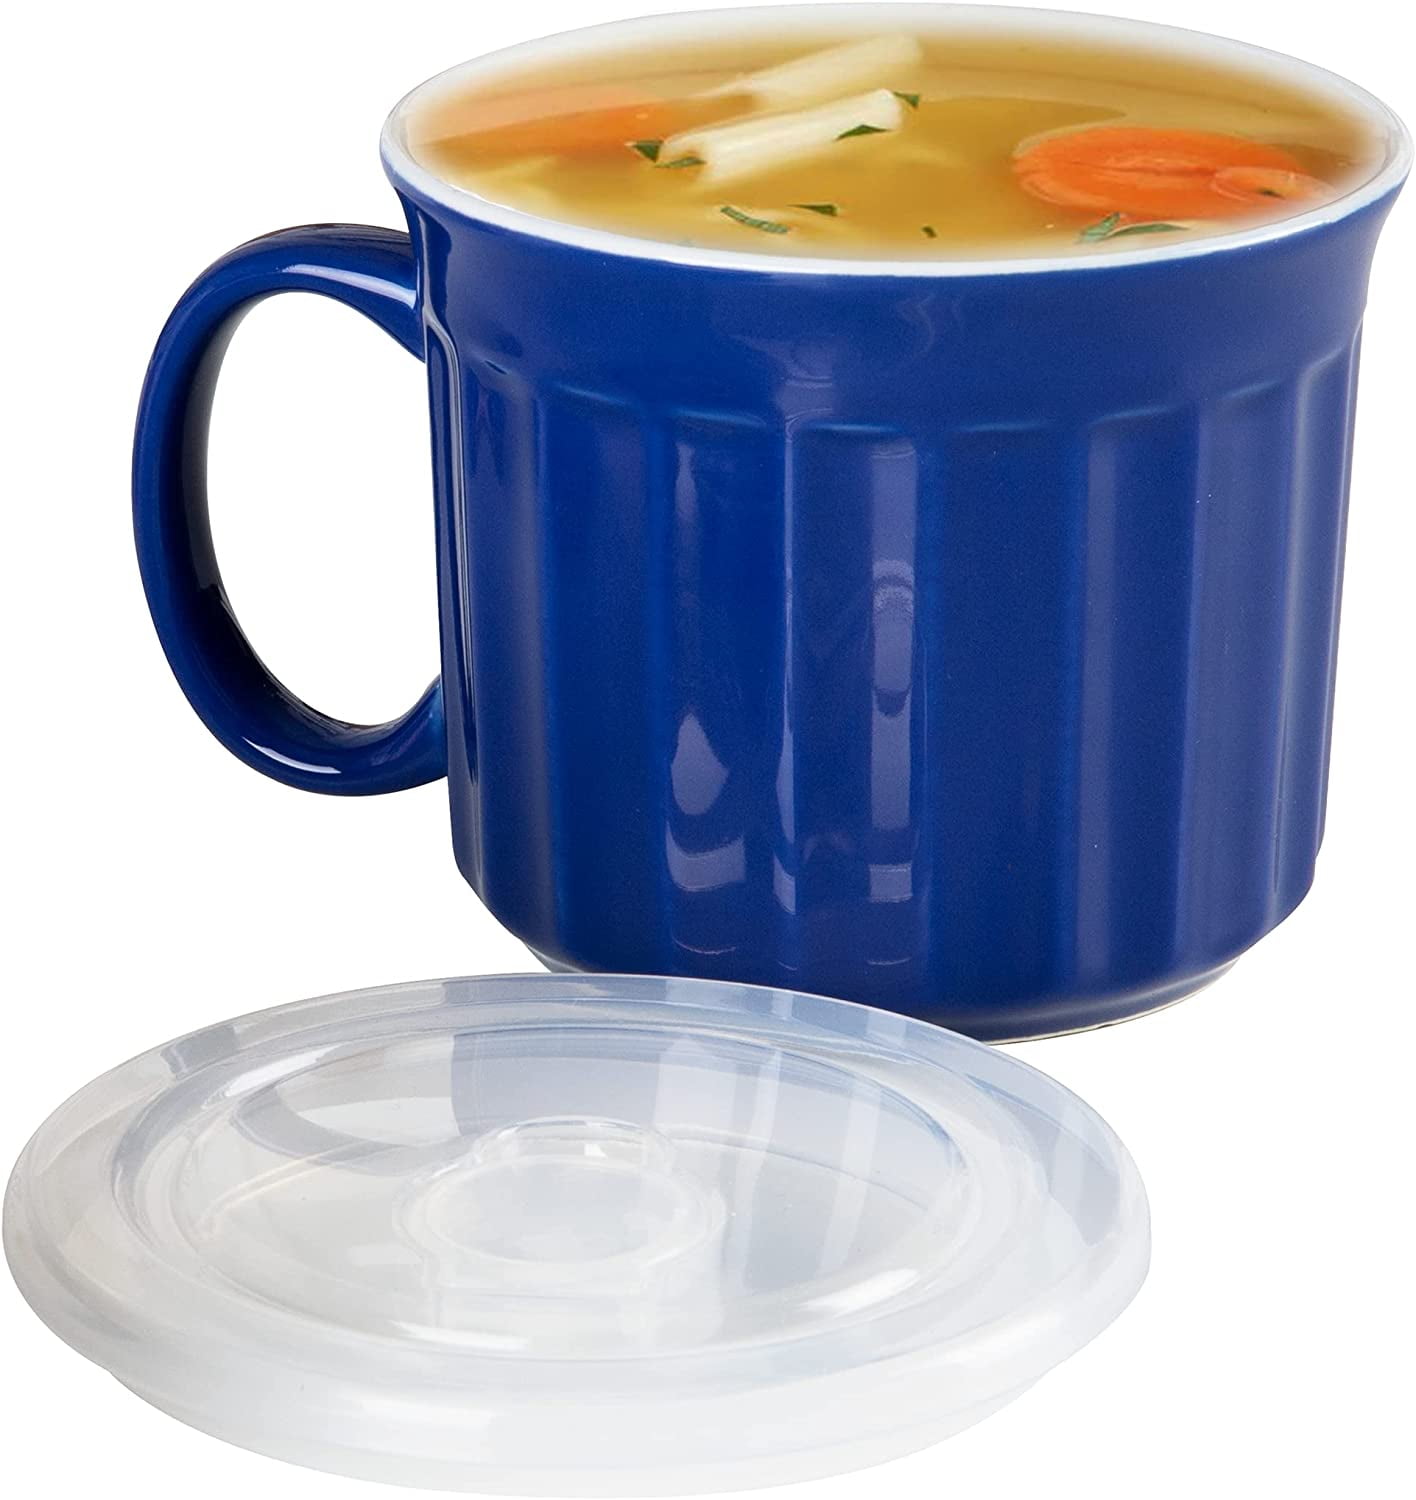 Kook Ceramic Soup Mugs, with Handle and Vented Plastic Lid, Set of 2, Blue